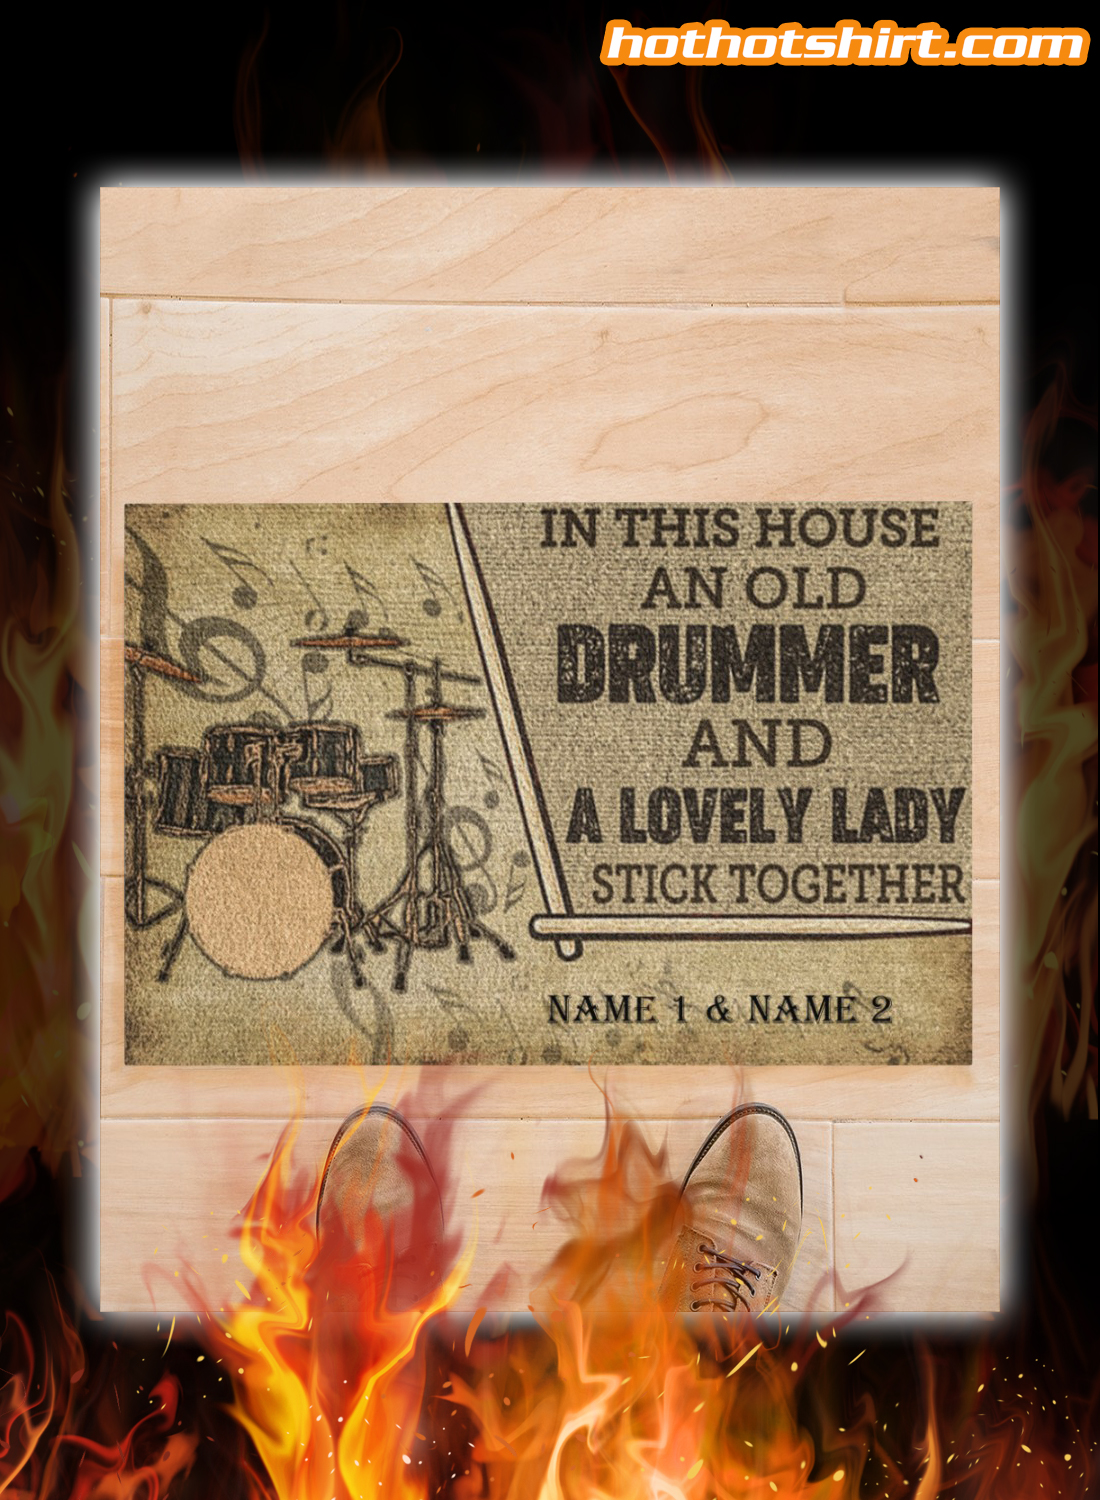 Drummer and a lovely lady stick together personalized doormat 2